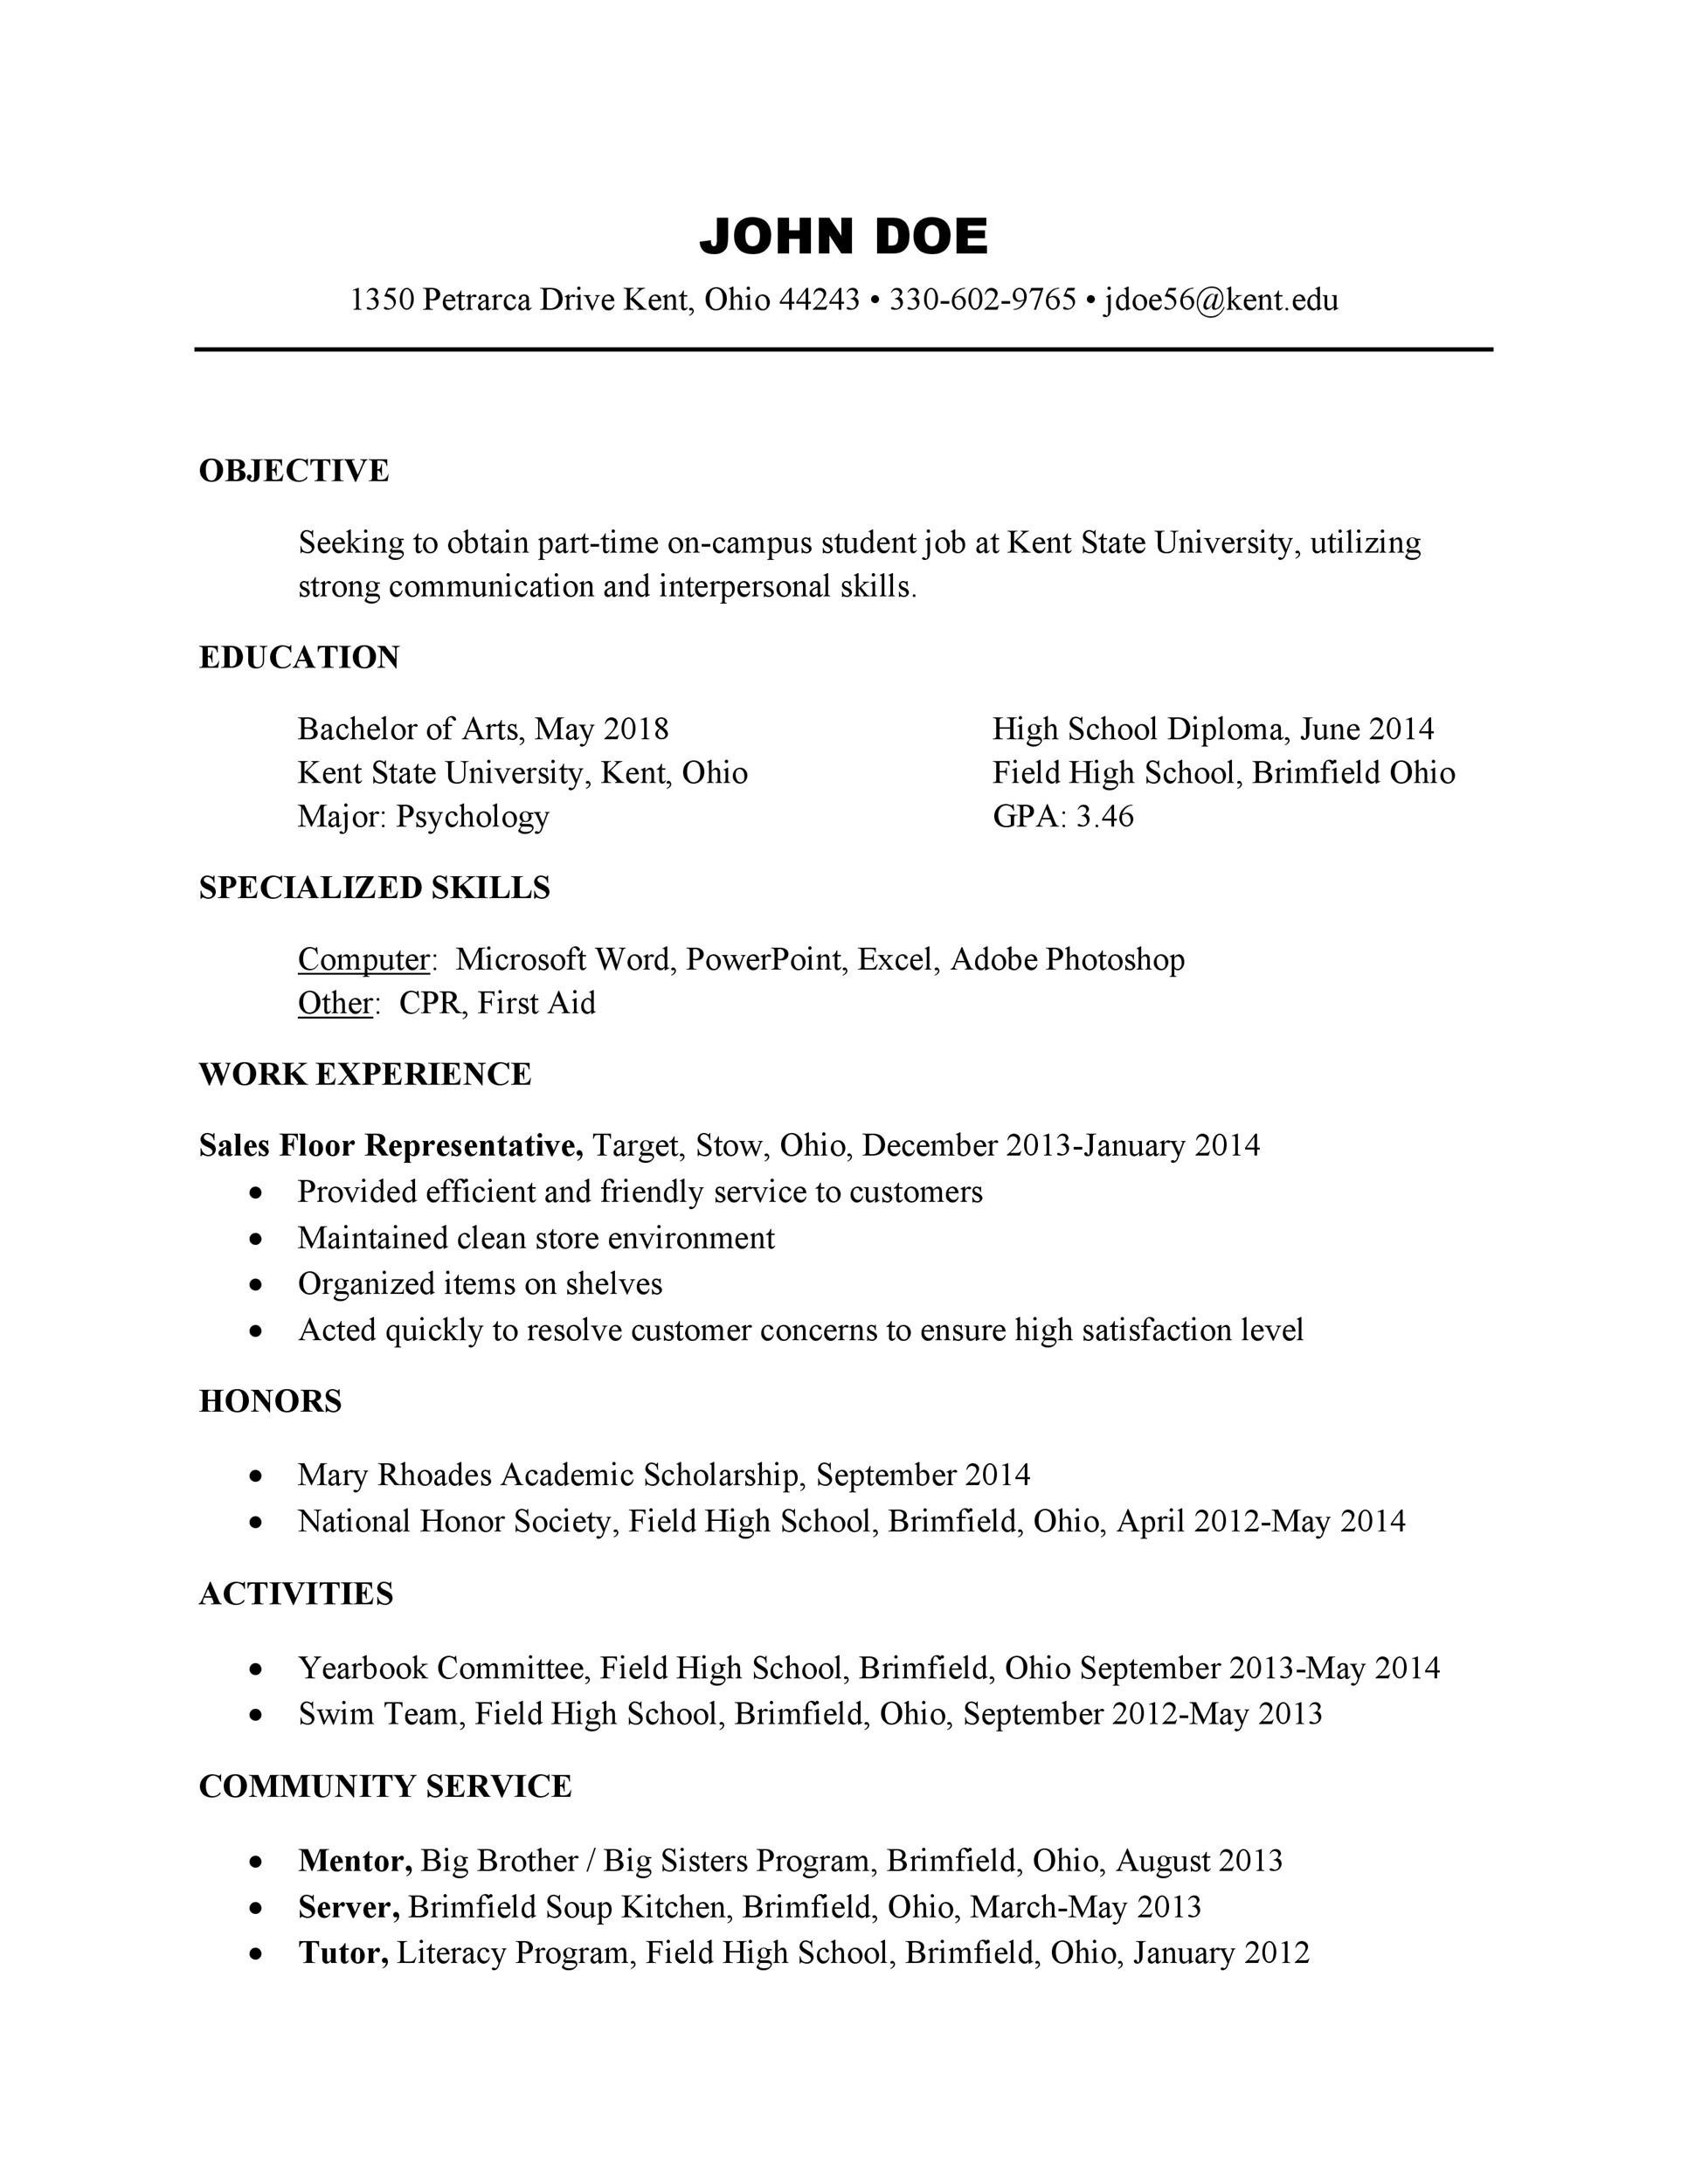 application letter as a student resume